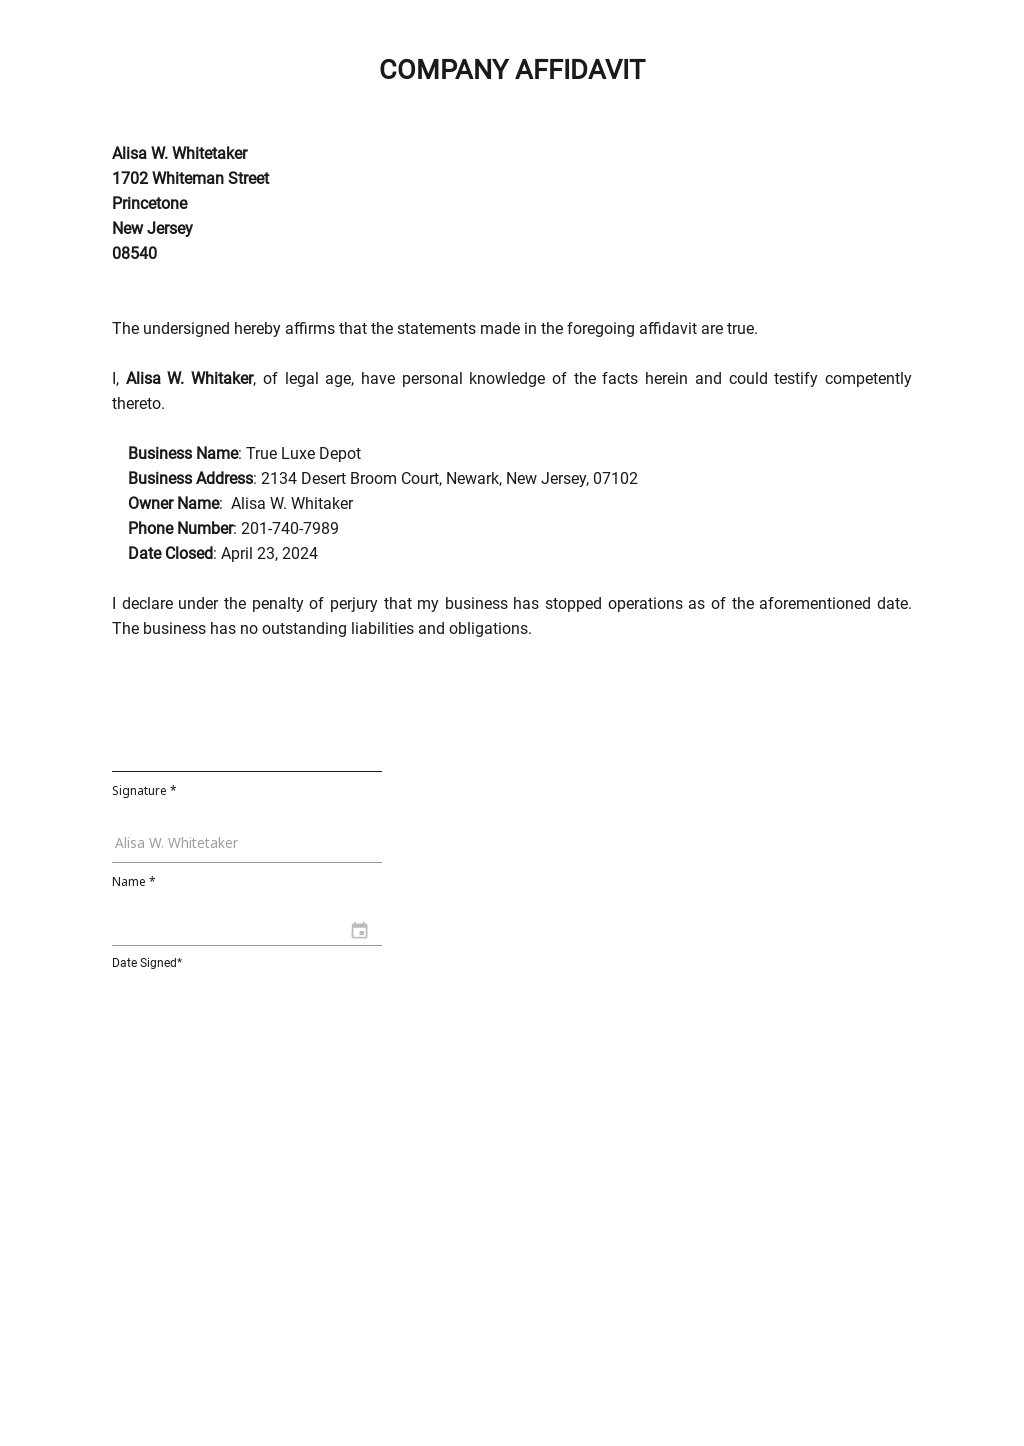 Affidavit Of Closure Of Business Template in Word, Google Docs